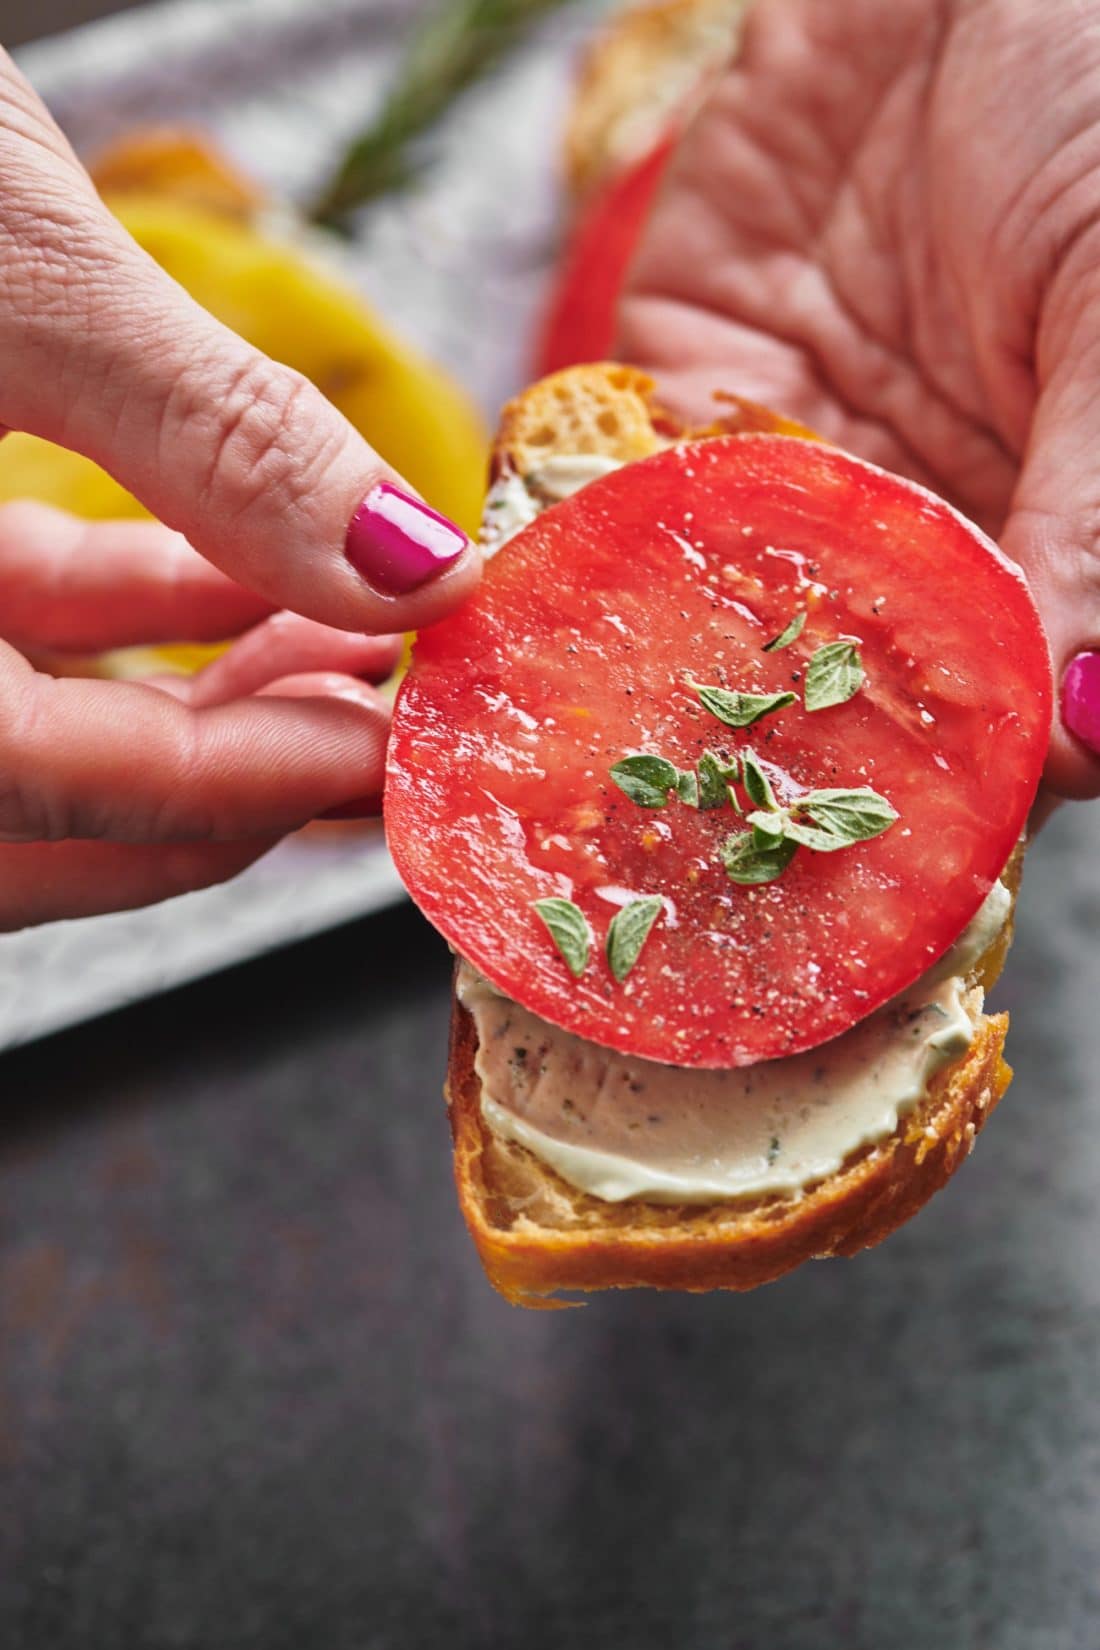 Woman placing a red tomato slice on bread with herbed whipped ricotta.